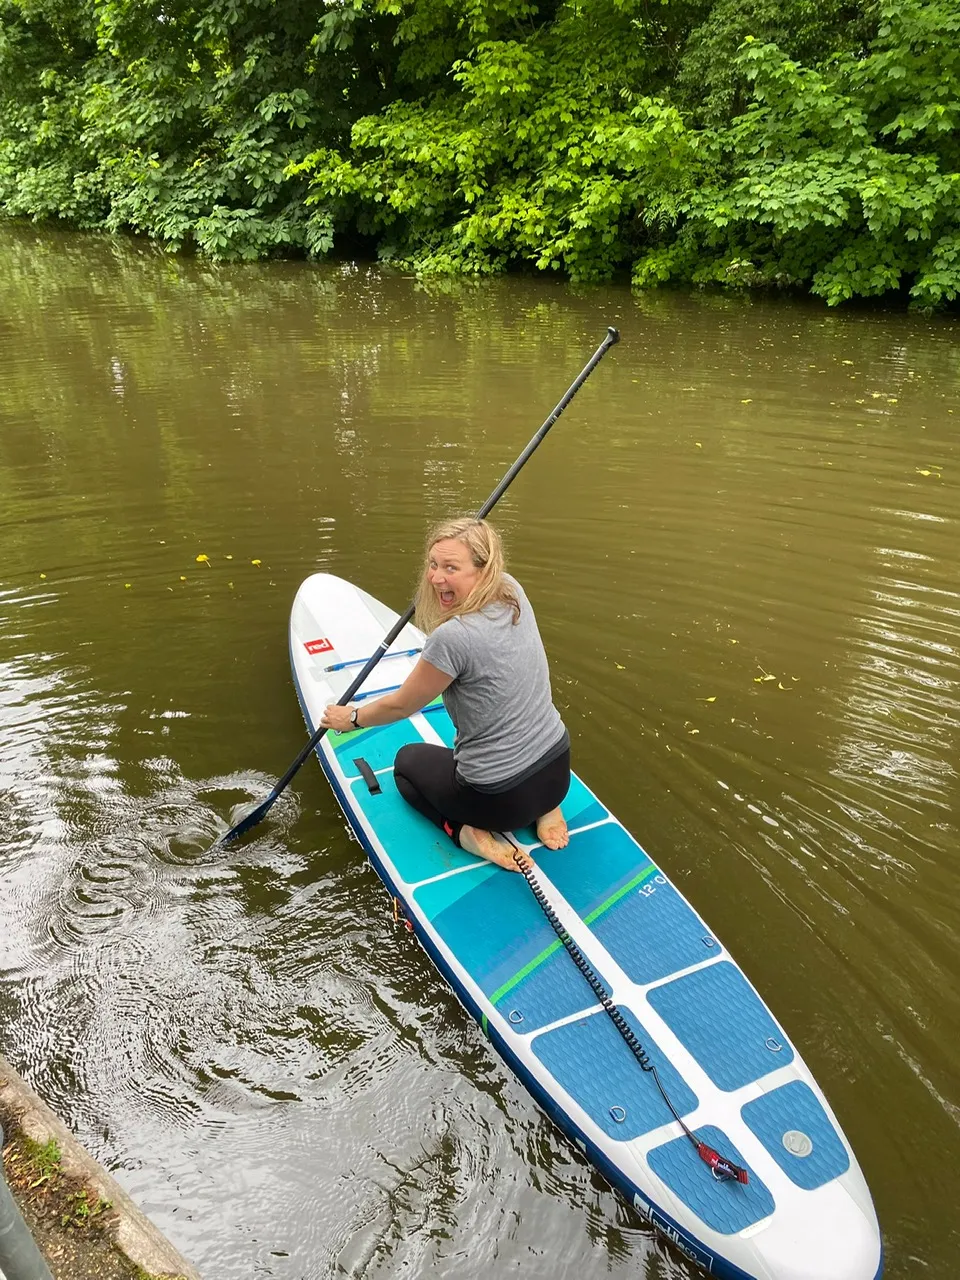 Maria Hodson begins her paddleboarding journey along the Thames with a silly grin looking back at the camera